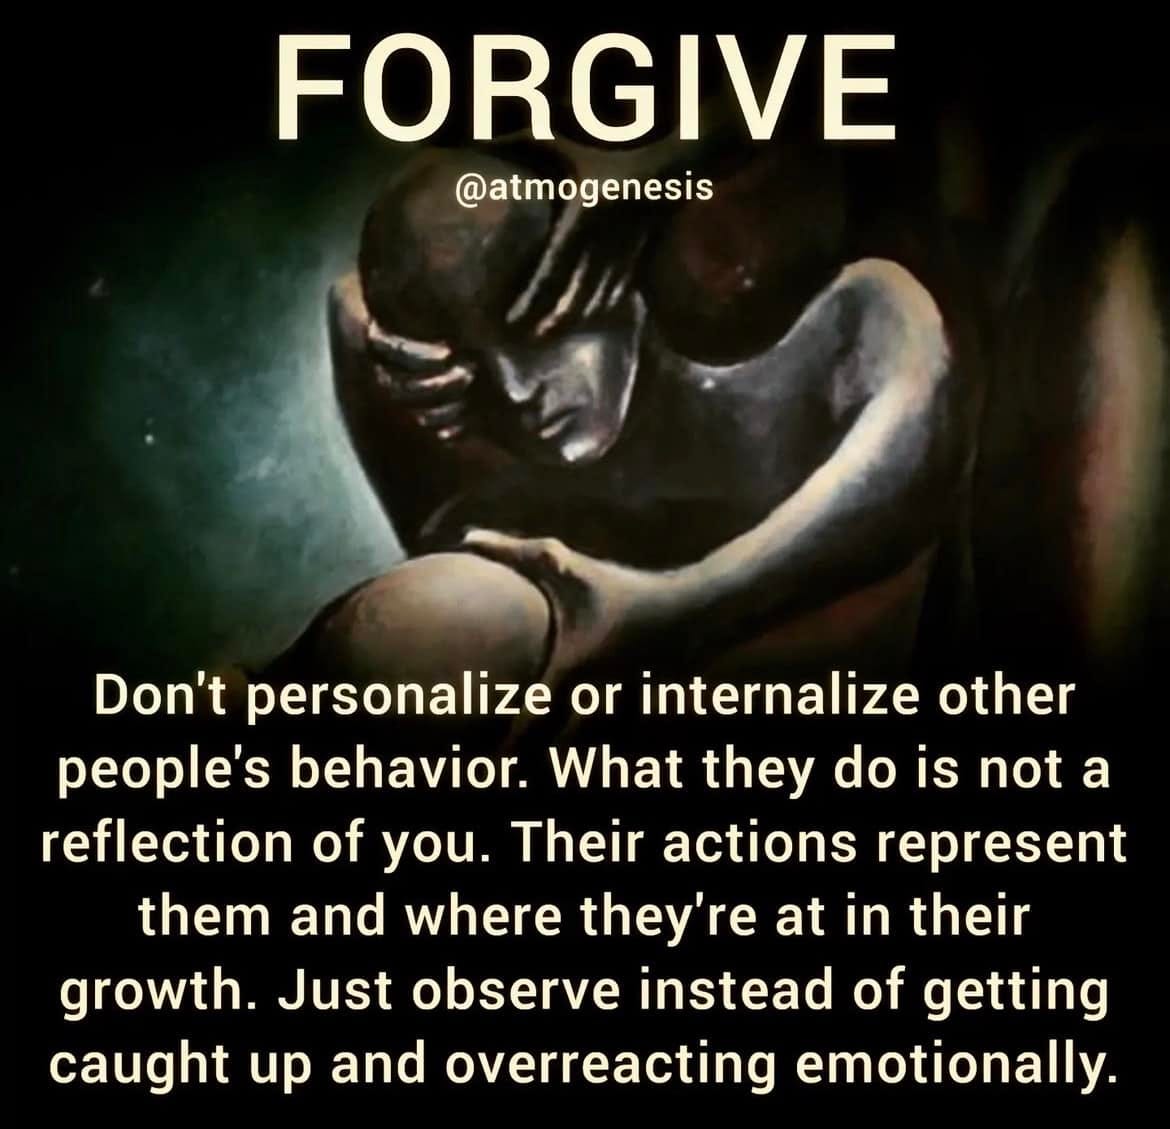 May be an image of 1 person and text that says 'FORGIVE @atmogenesis Don't personalize or internalize other people's behavior. What they do is not a reflection of you. Their actions represent them and where they're at in their growth. Just observe instead of getting caught up and overreacting emotionally.'